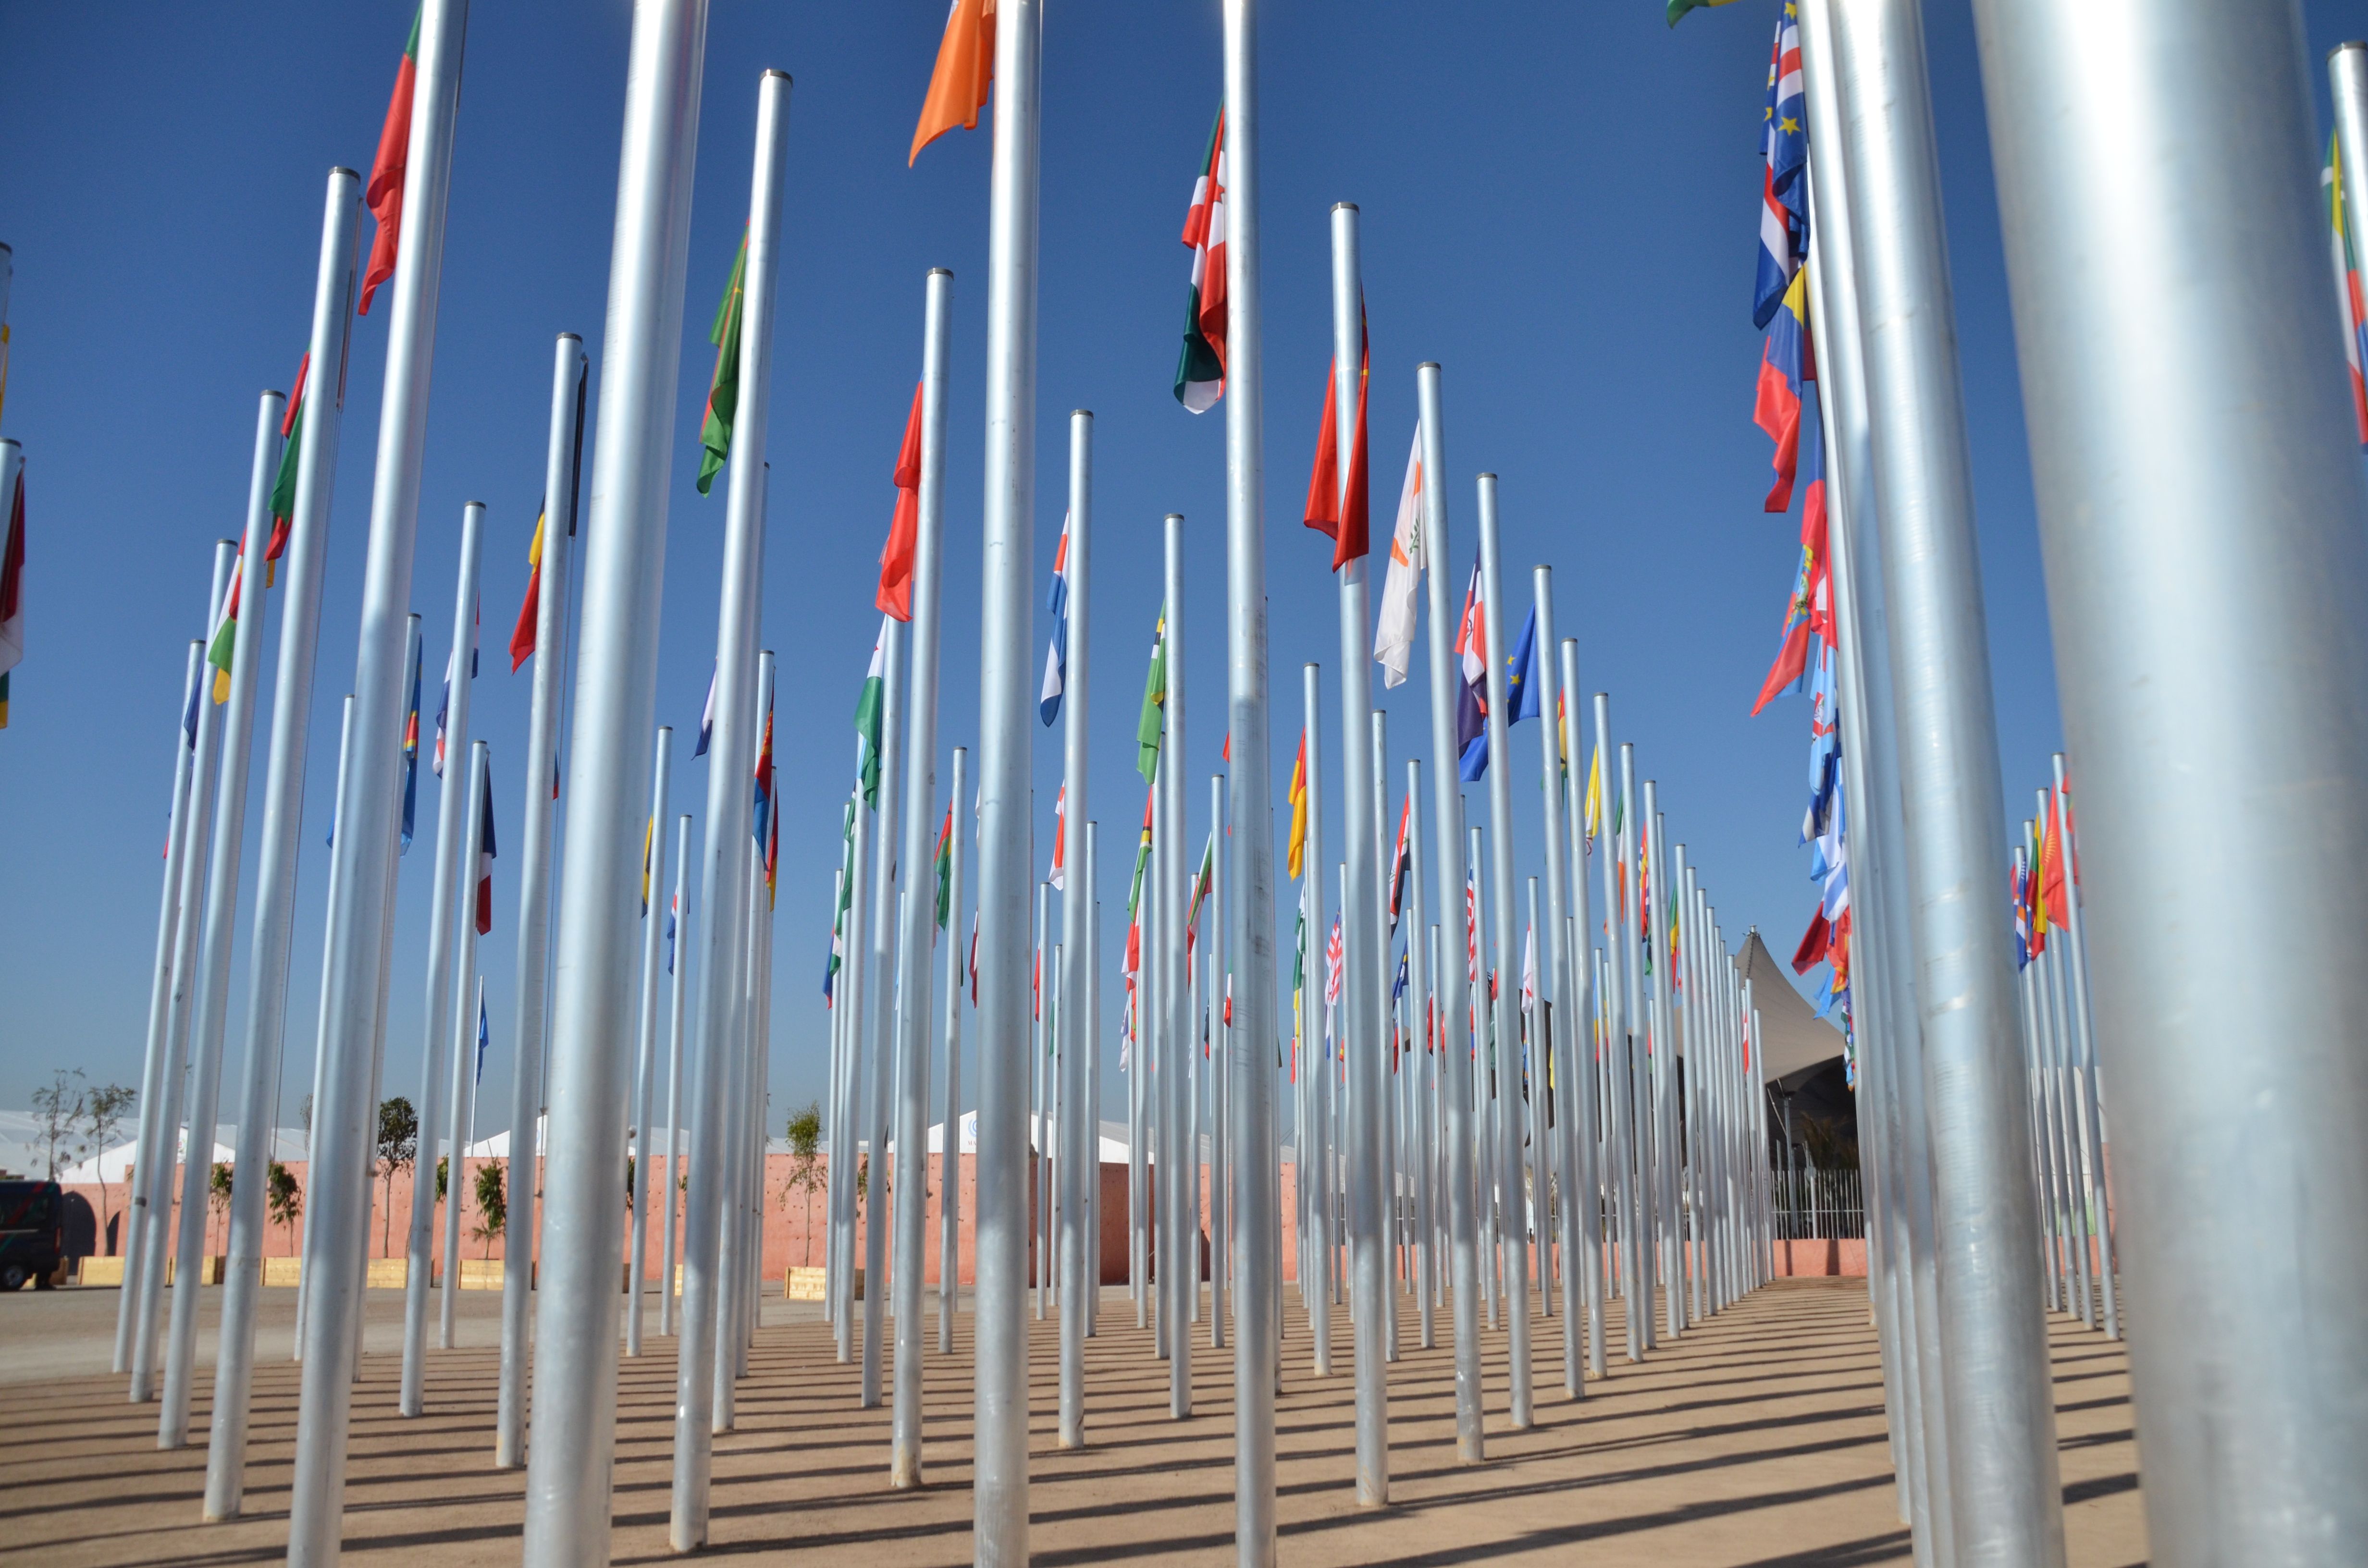 The flags of many nations fly at the COP22 climate conference in Marrakesh. The nearly 200 nations committed to the Paris Climate Agreement were stunned this week when President elect Trump announced his plans to rush to withdraw from the accord. Image by Justin Catanoso. Morocco, 2016. 